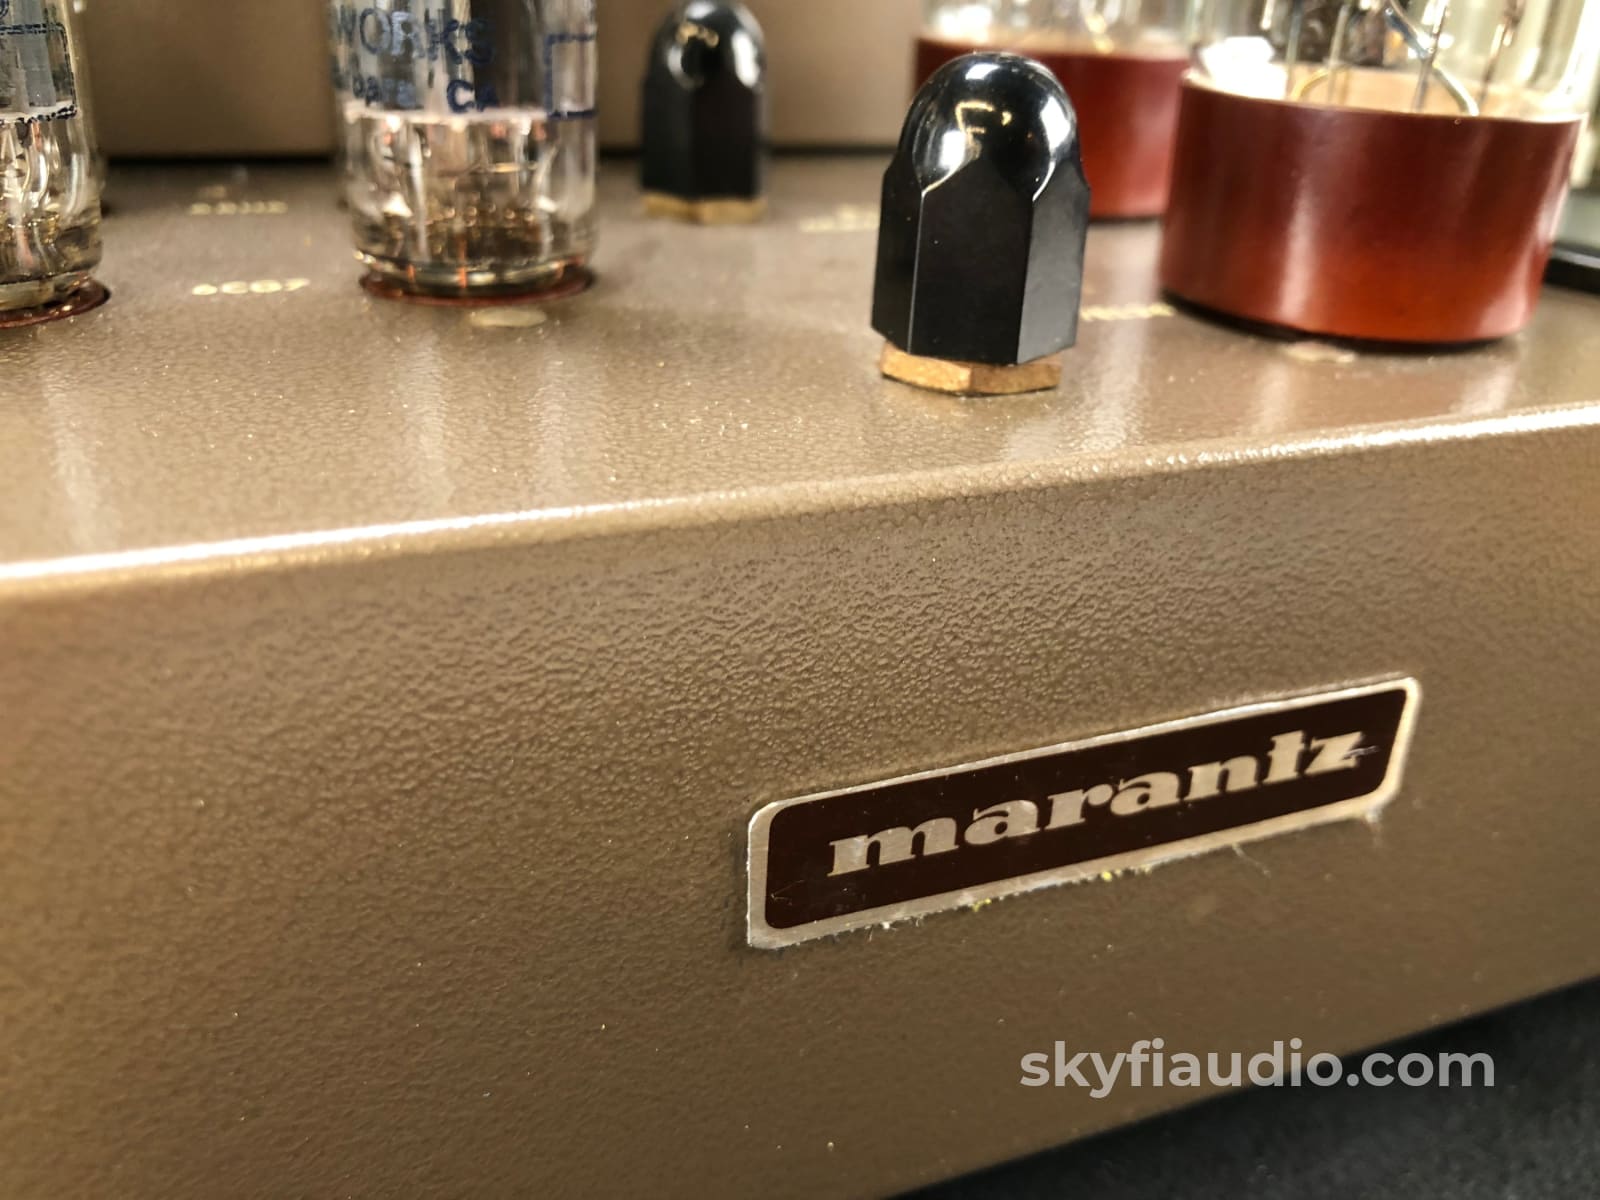 Marantz 8B Tube Amplifier - Completely Restored And Perfect!